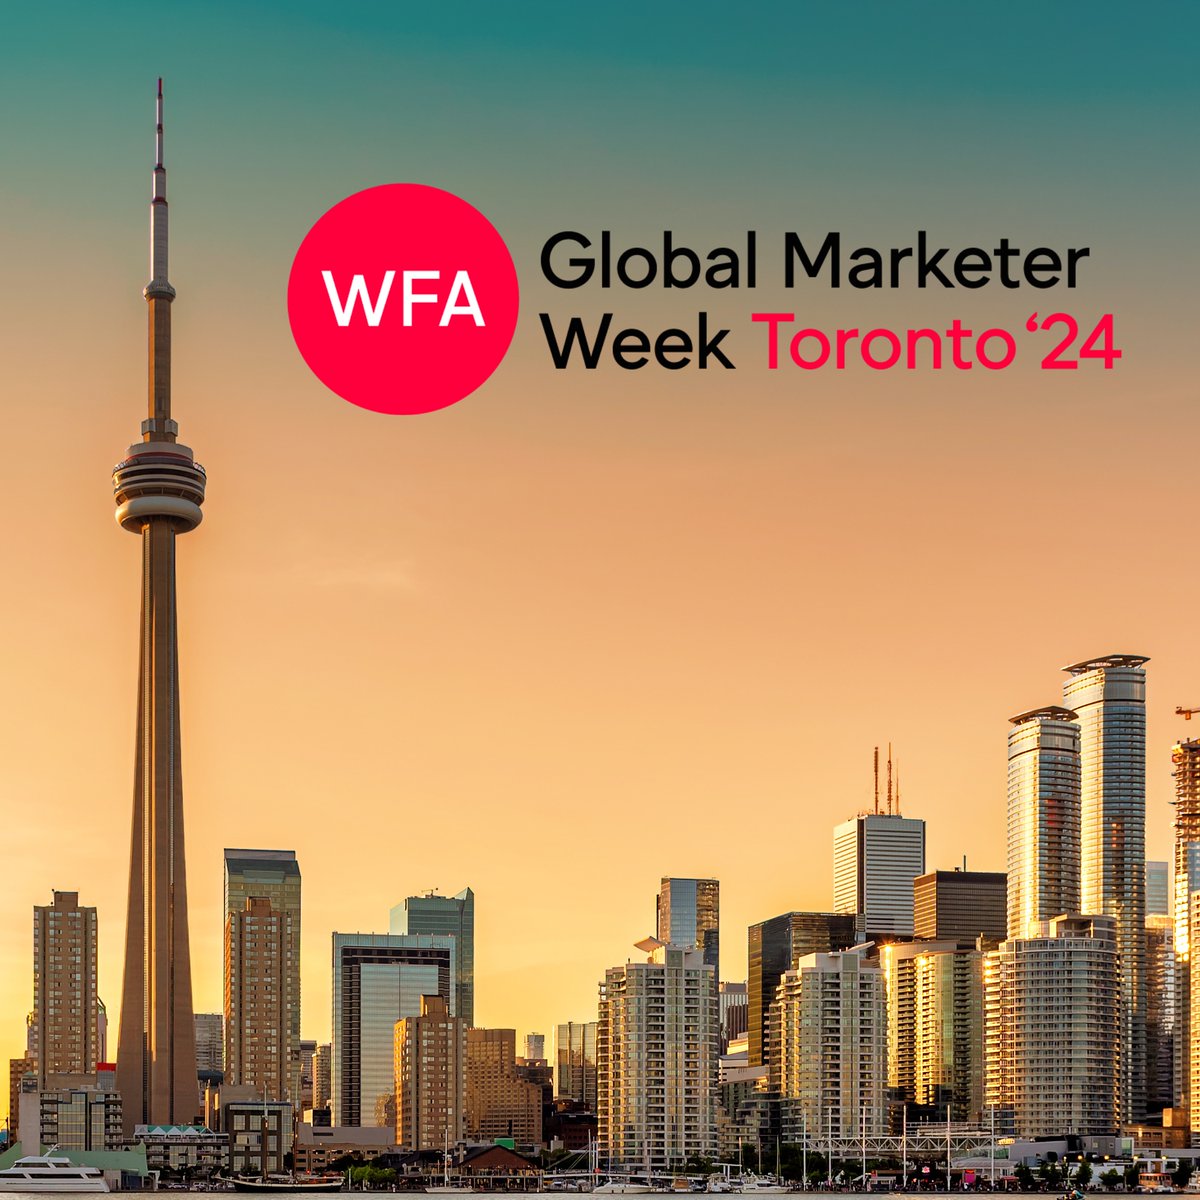 Anticipating an exceptional week of engaging discussions with global marketers @pepsi @IBM @Nestle @Nissan @abinbev  @Mastercard @LOrealGroupe at @wfamarketers Week in Toronto, May 14-17. Register to attend: wfanet.org/connections/gl… #WFAGMW #GMW2024  @MarketMakersHQ